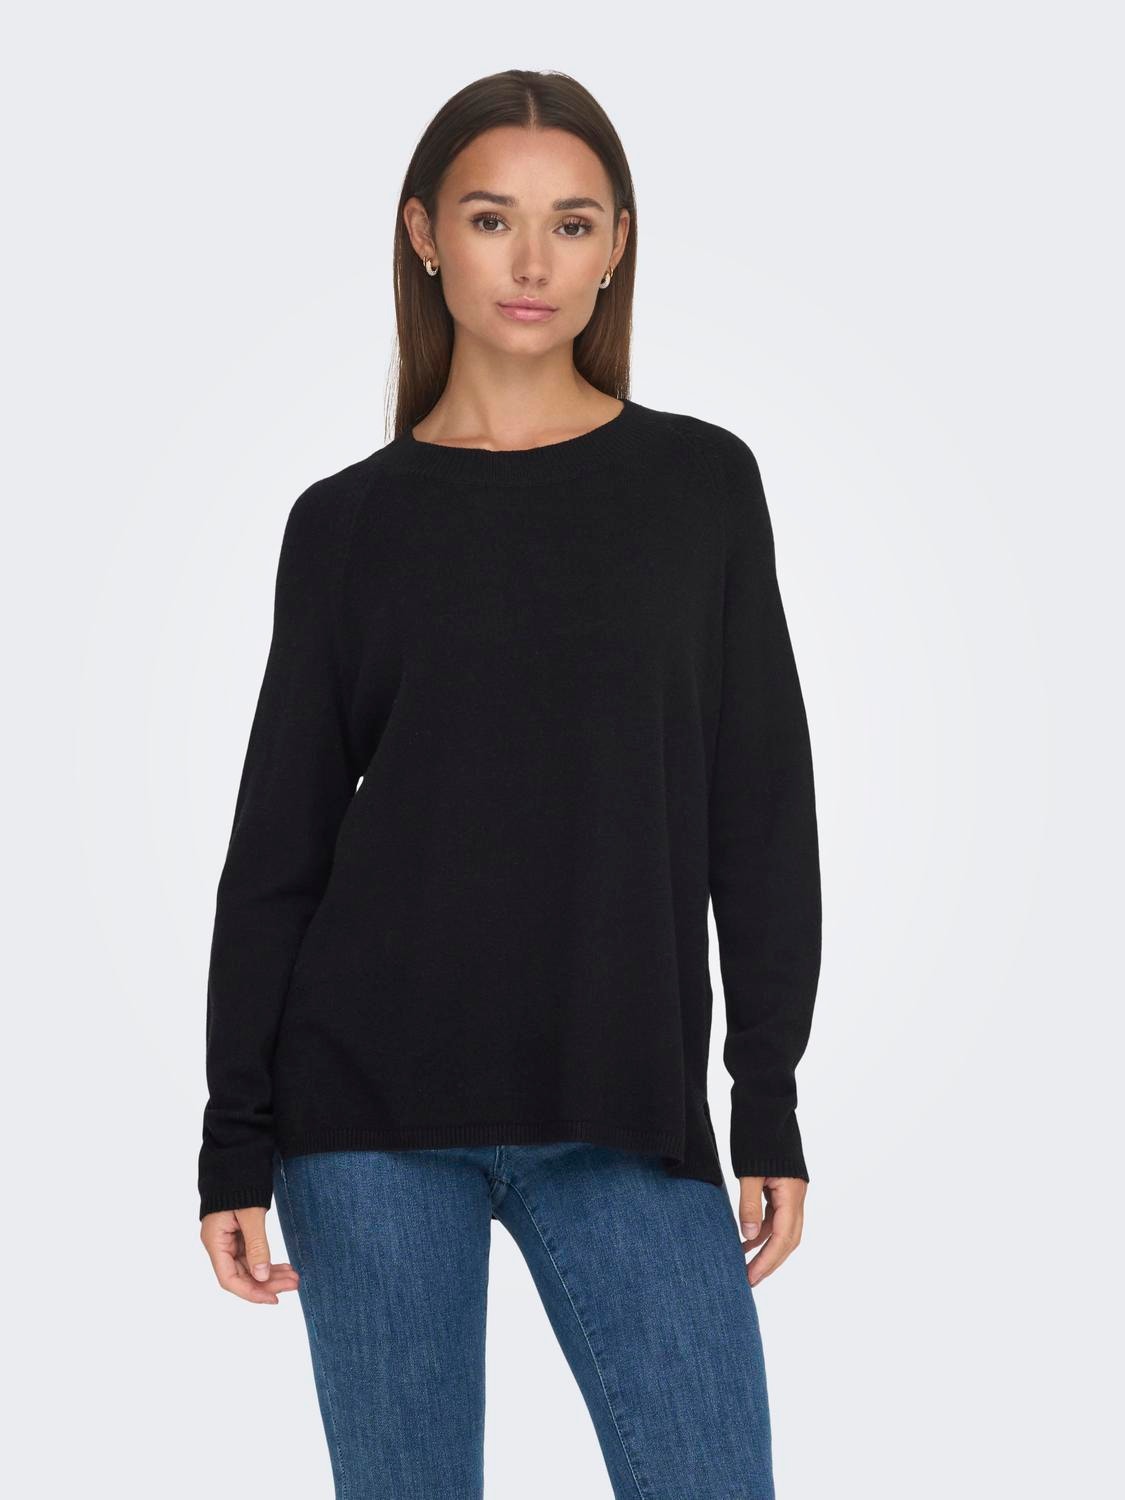 ONLY Knit fit O-hals Pullover -Black - 15292897